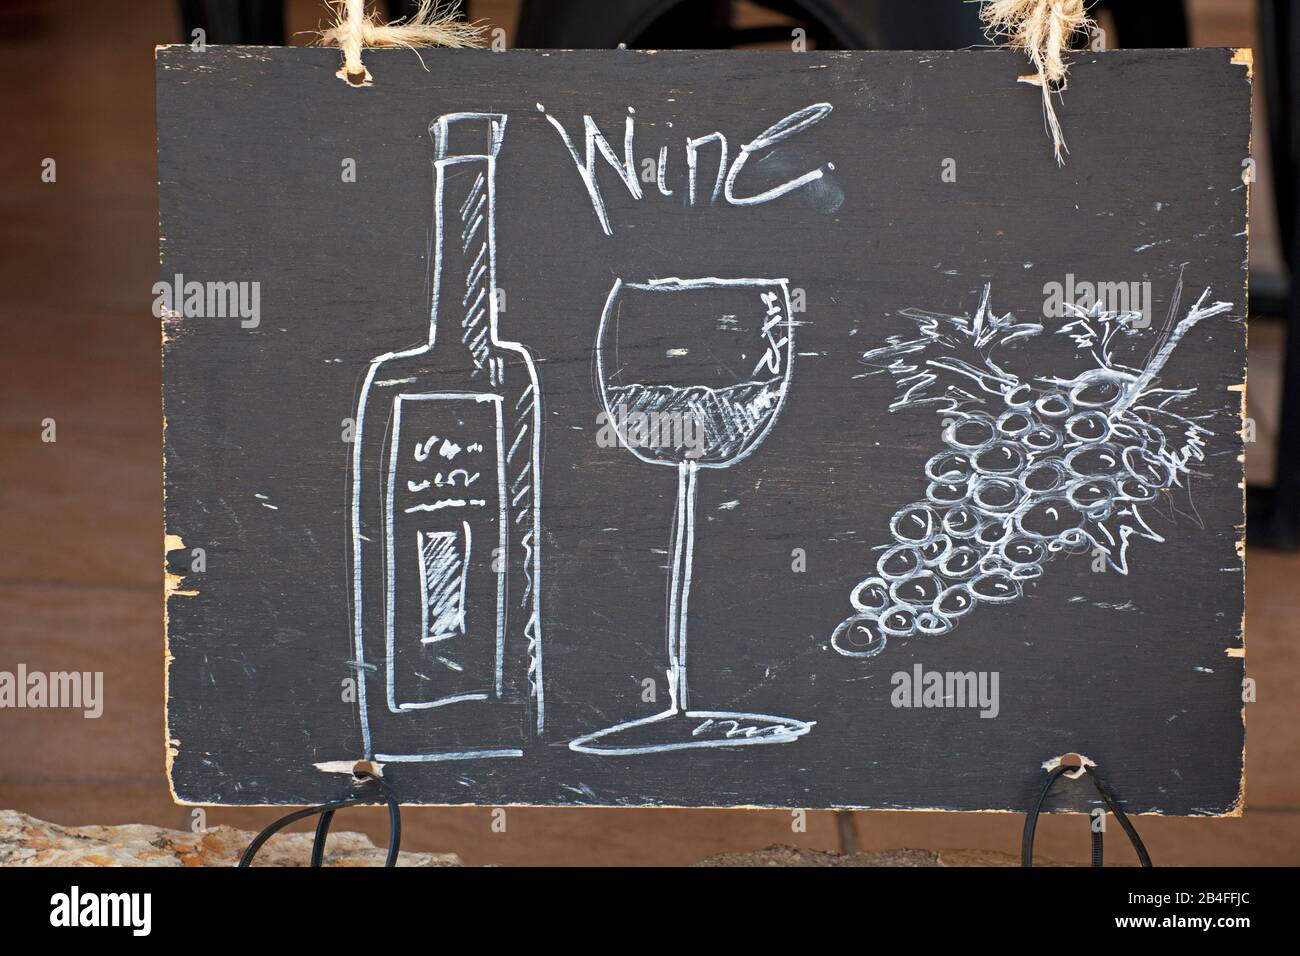 Advertising for a wine bar in Greece Stock Photo